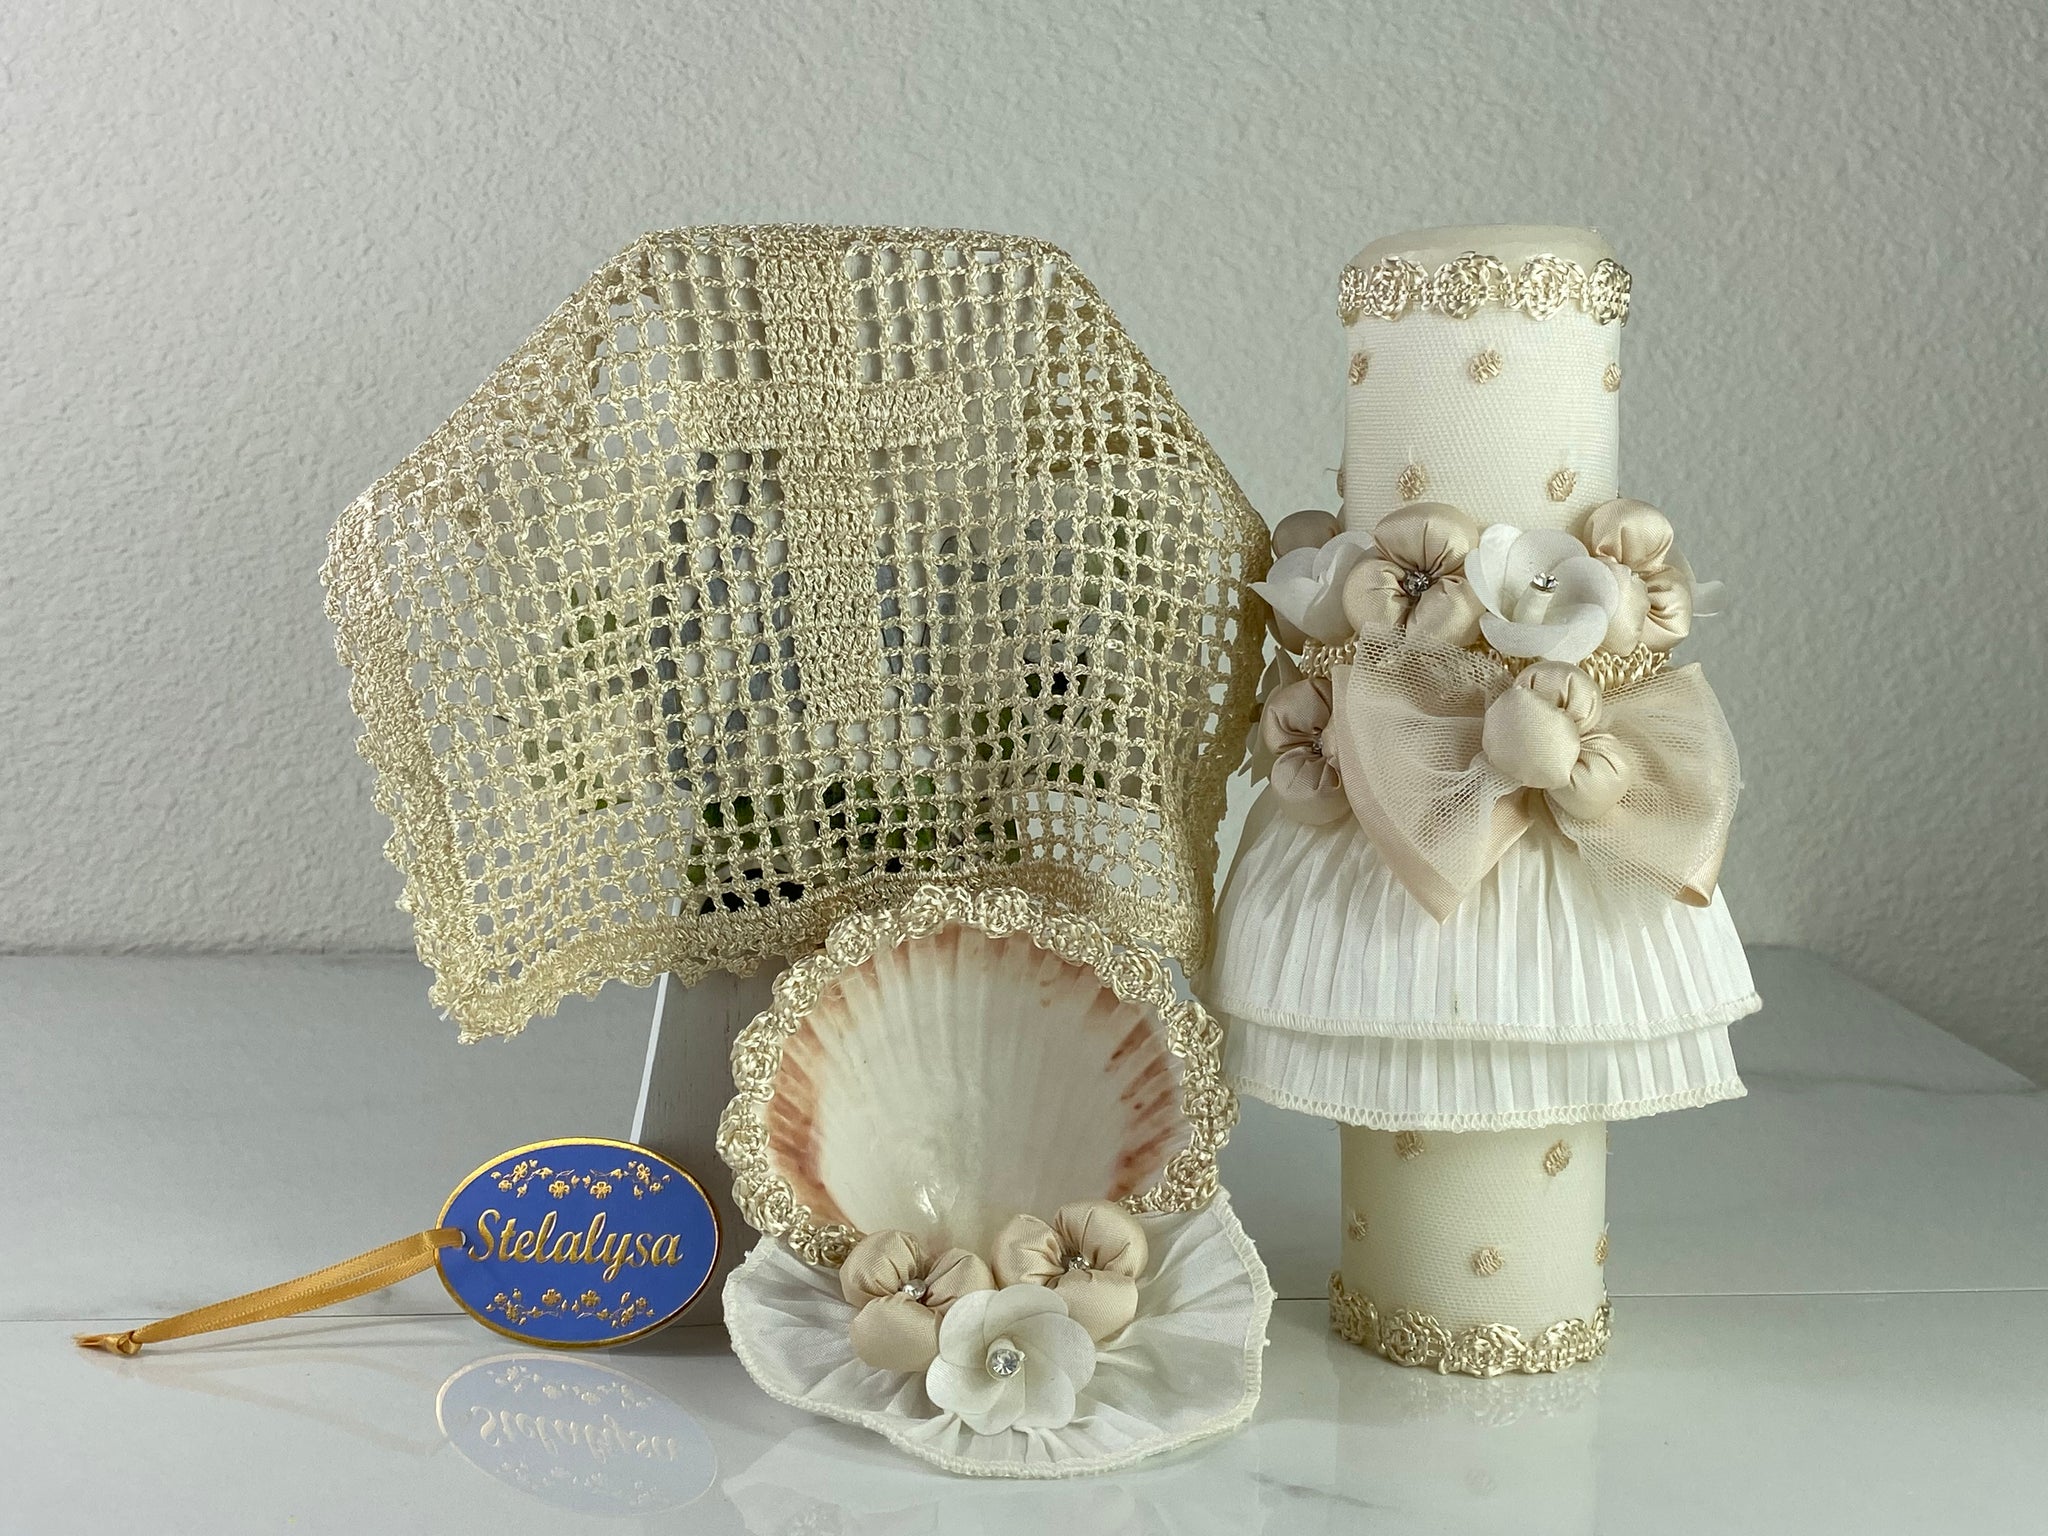 These one-of-a-kind Candle set is handmade and ivory in color.  This candle can also be use with a white baptism outfit because it has an array of light colors including white.   It is uniquely decorated with ribbon, pearls, crystals, flowers, and beads making it a gorgeous keepsake.   This candle is oval in shape.    To match, the Shell is put together piece by piece to compliment the Candle and Handkerchief.  The Handkerchief is elegantly crotchet 